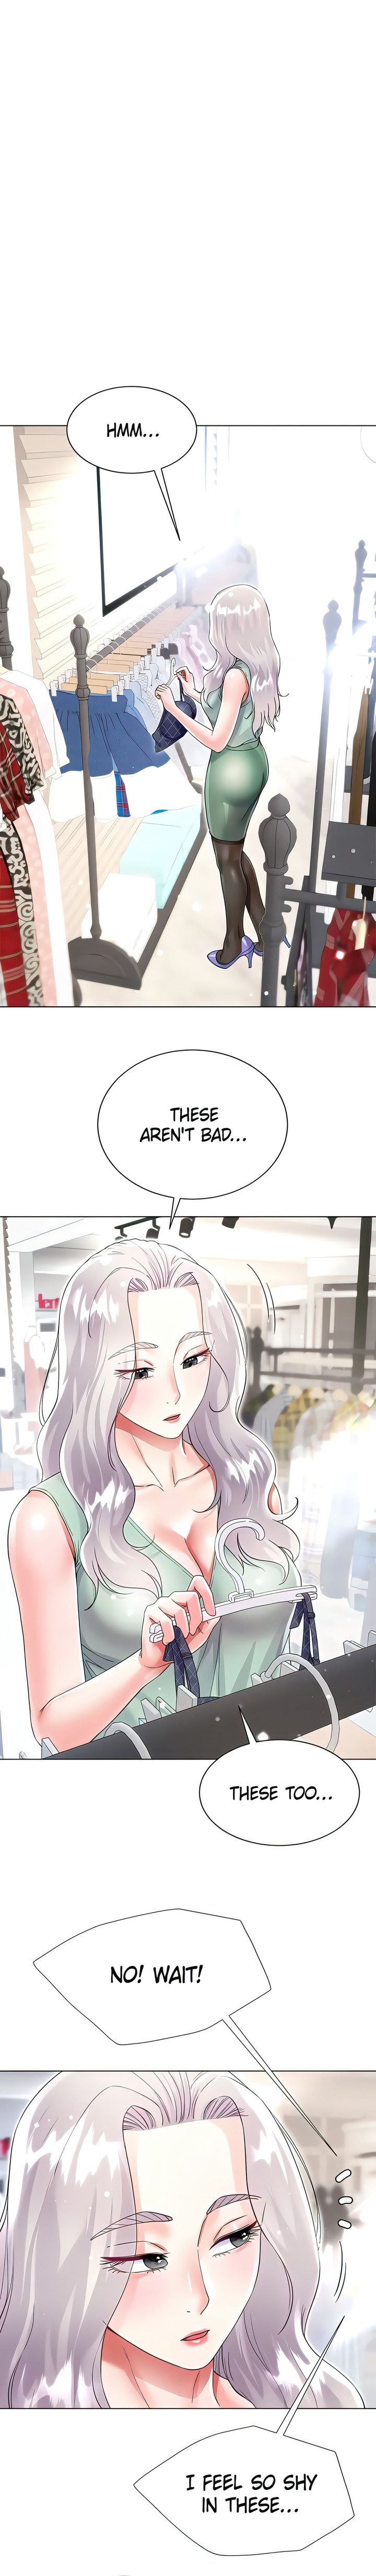 my-sister-in-laws-skirt-chap-48-14